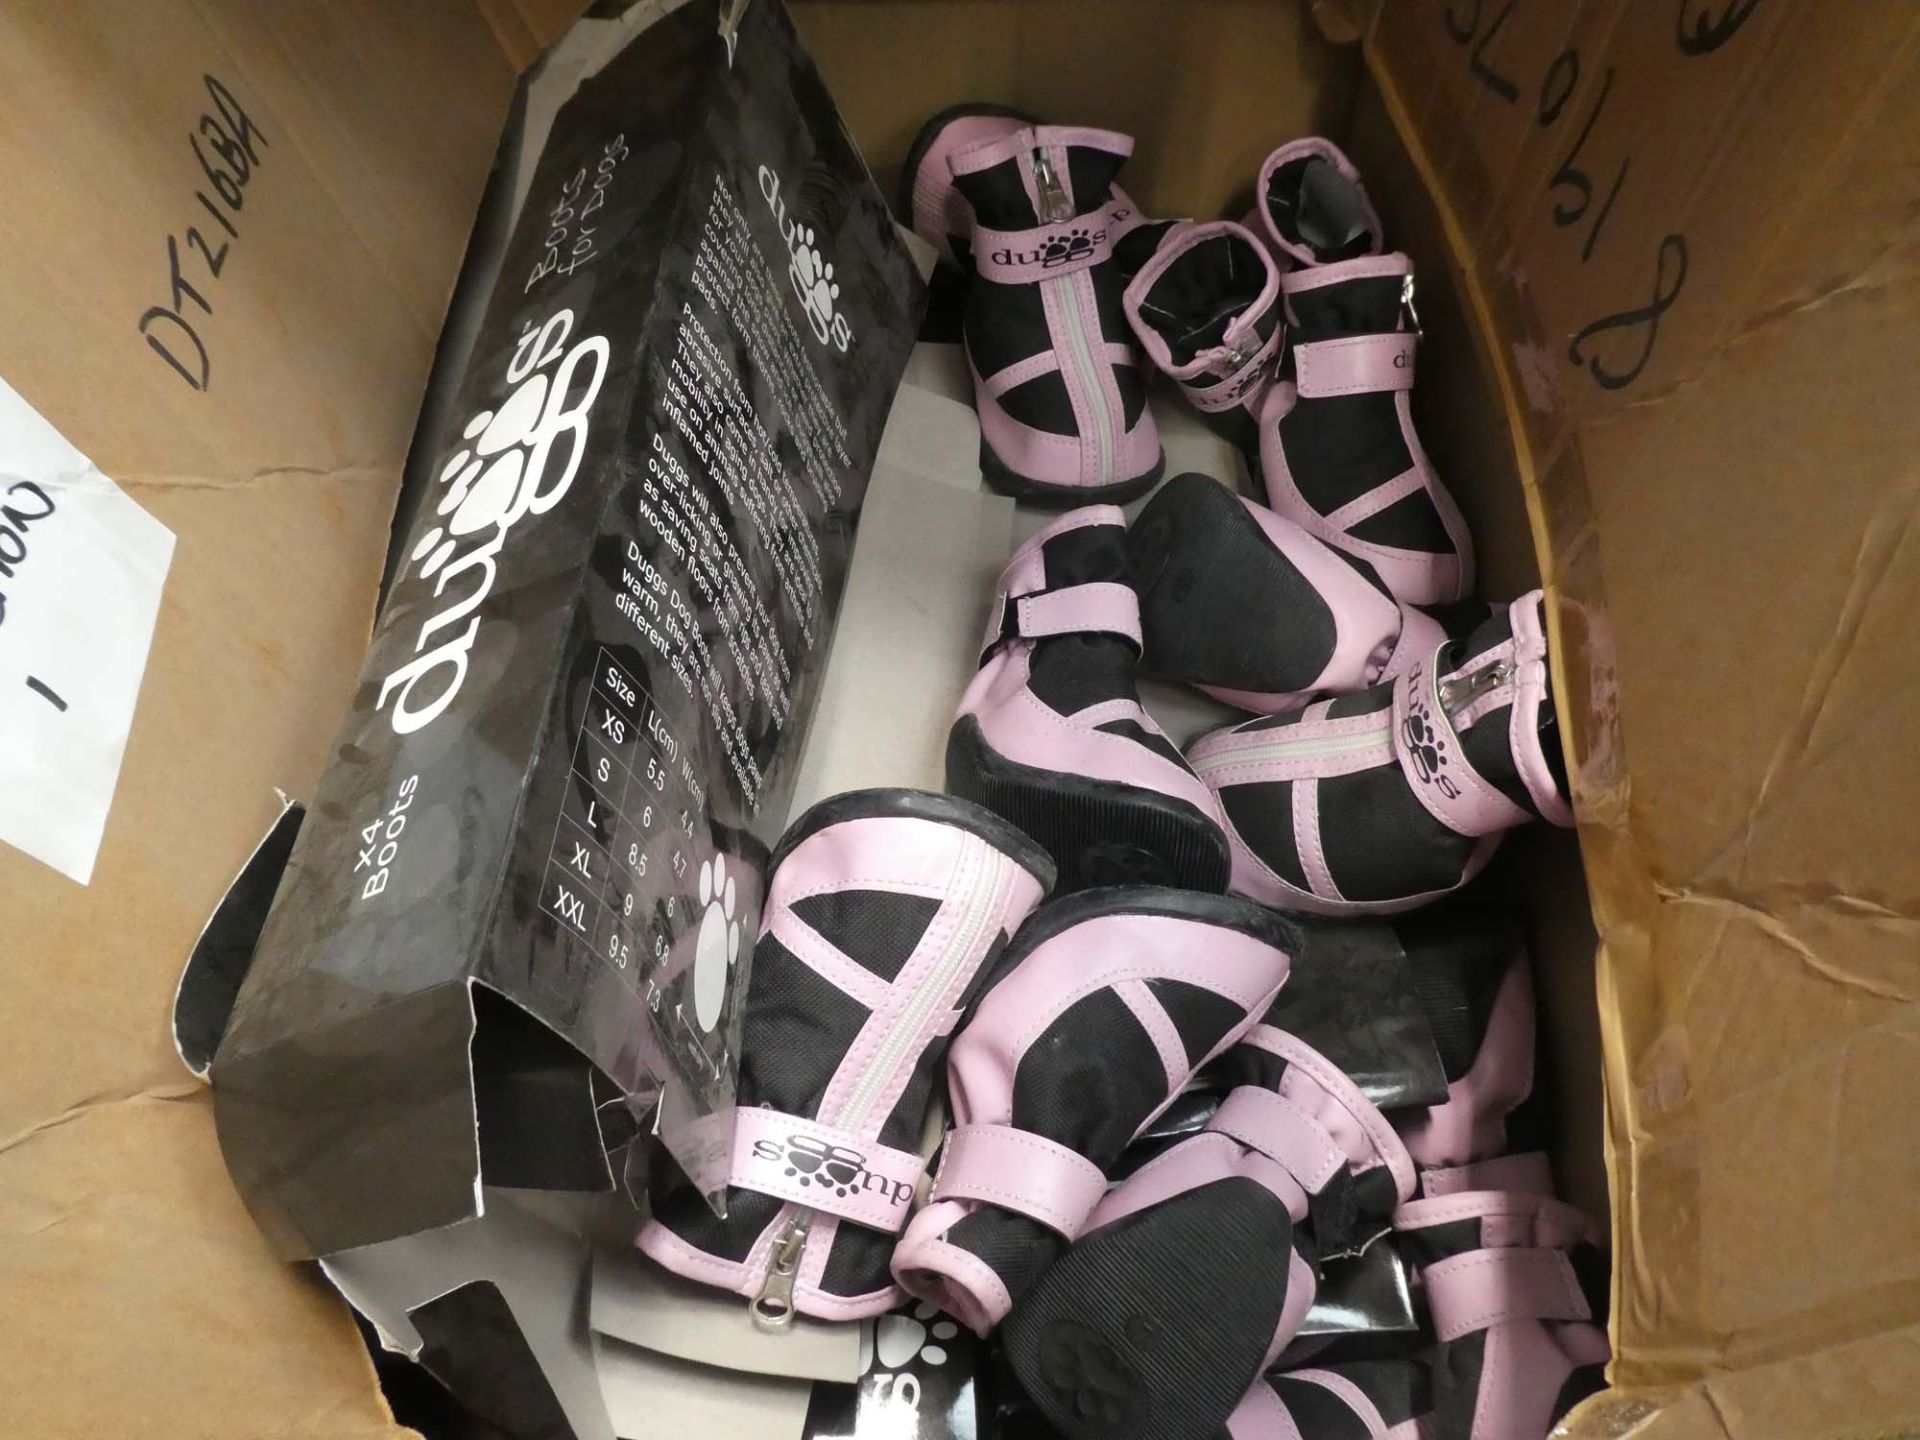 Large box of dog boots and shoes